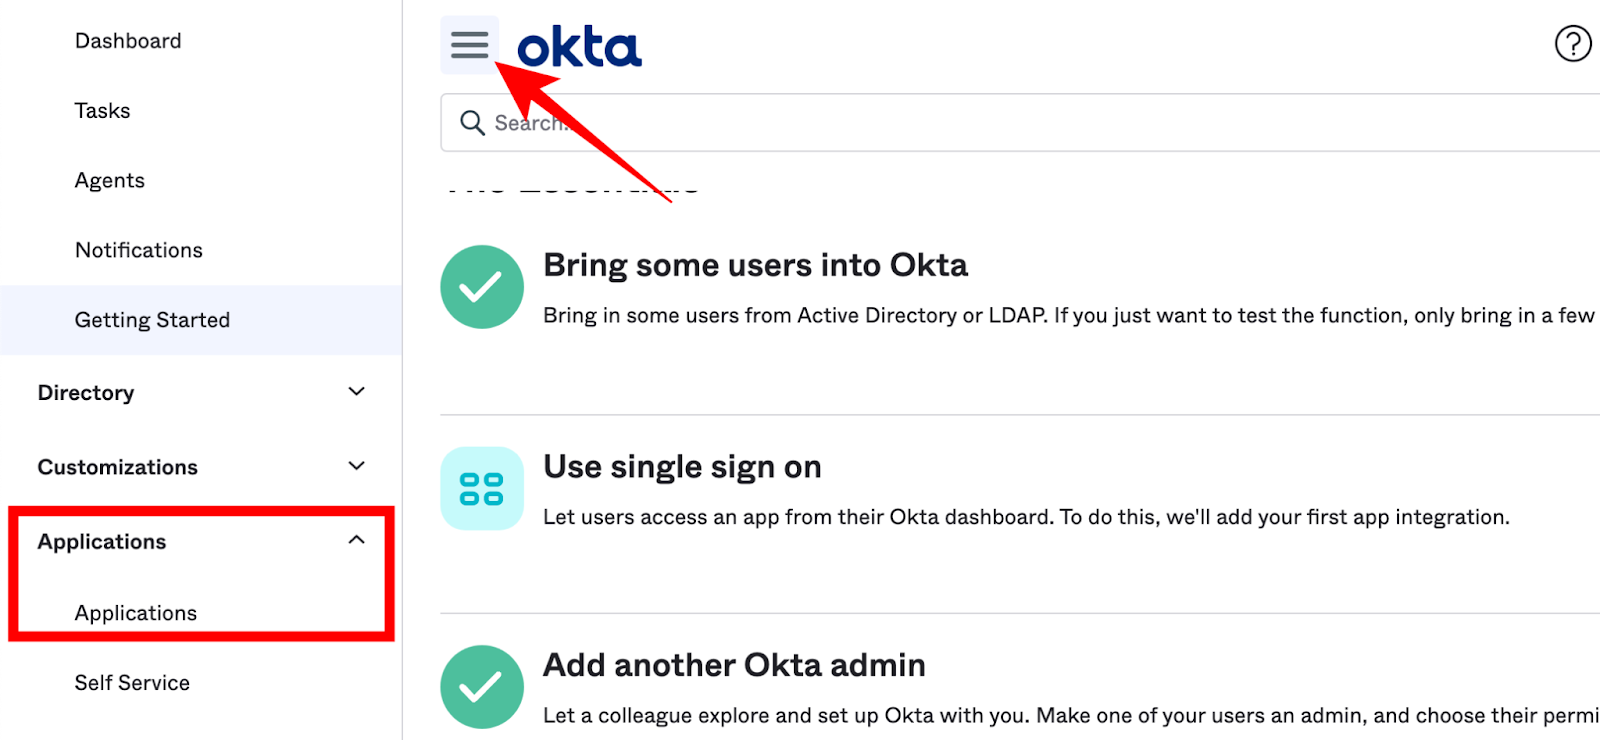 The "Applications" item in the left nav is highlighted and there is an arrow pointing to the hamburger menu item next to the "okta" logo.